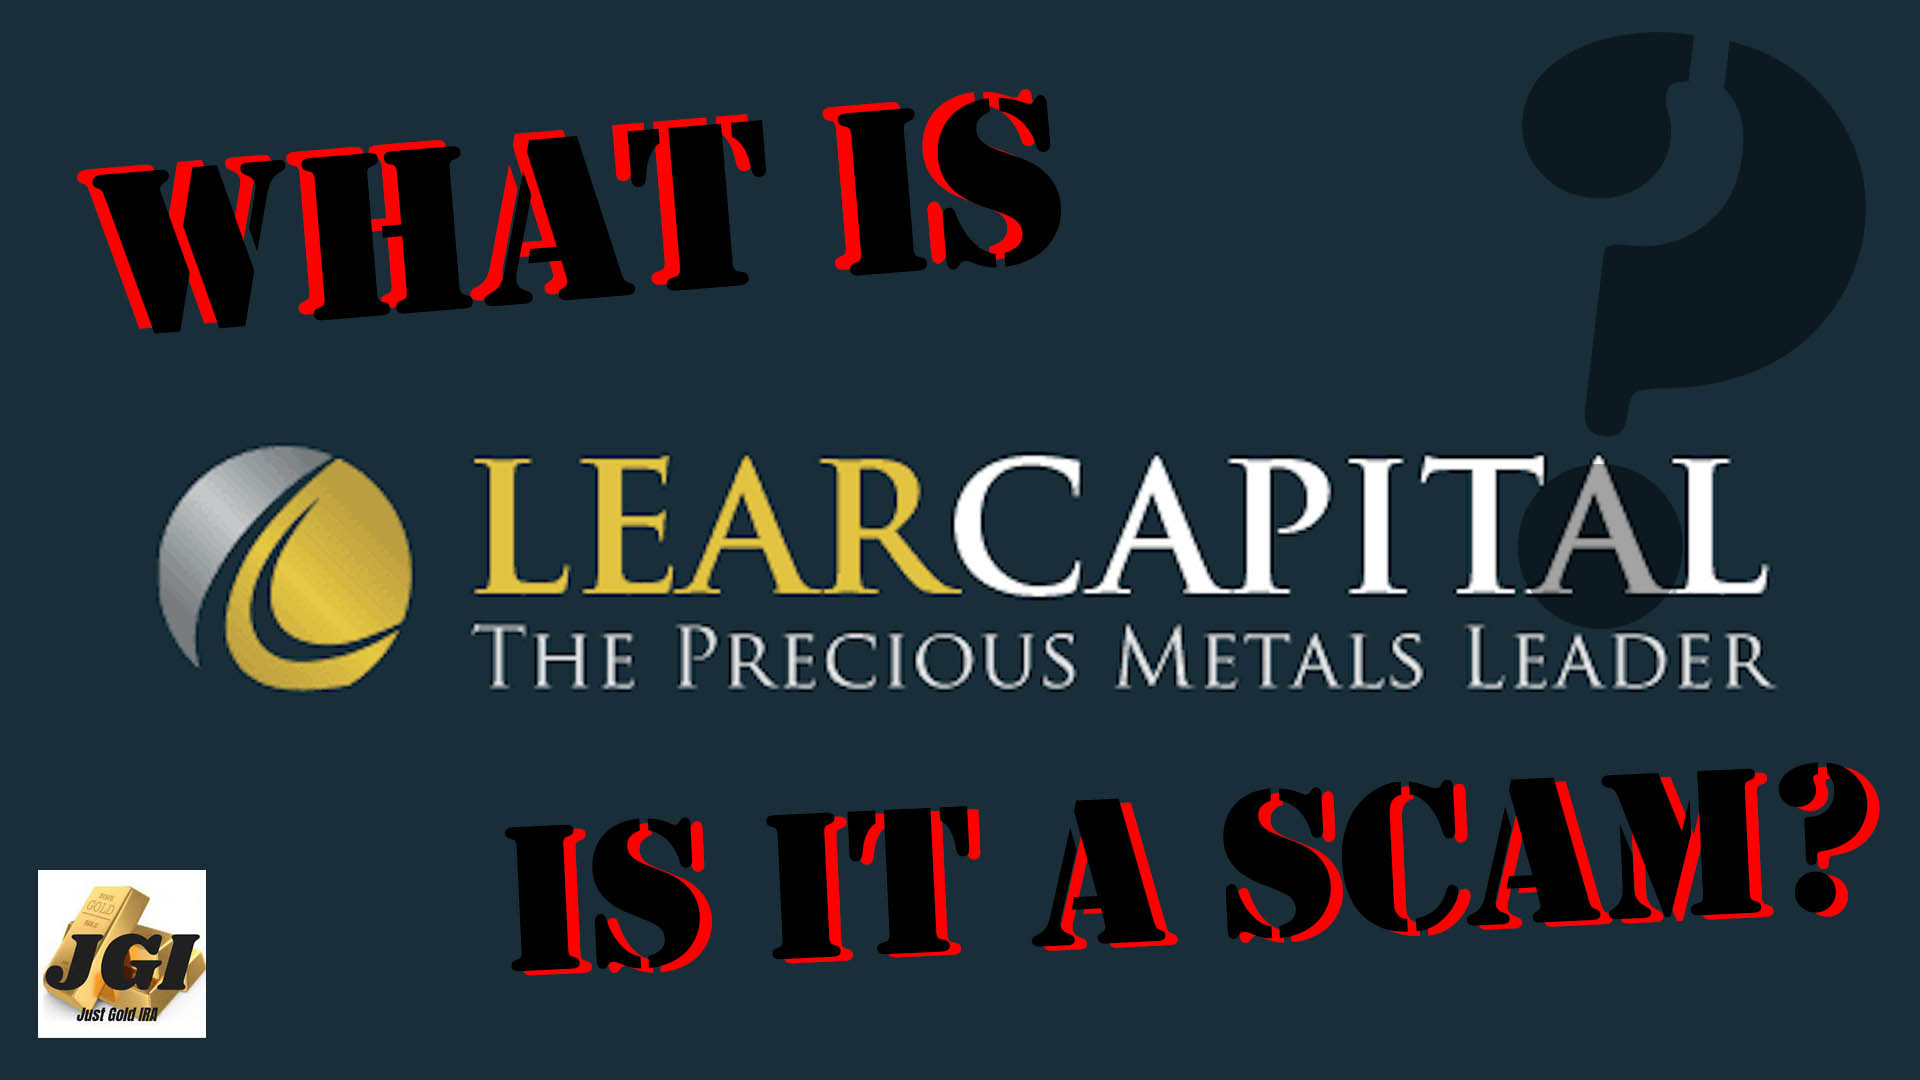 Lear Capital Review